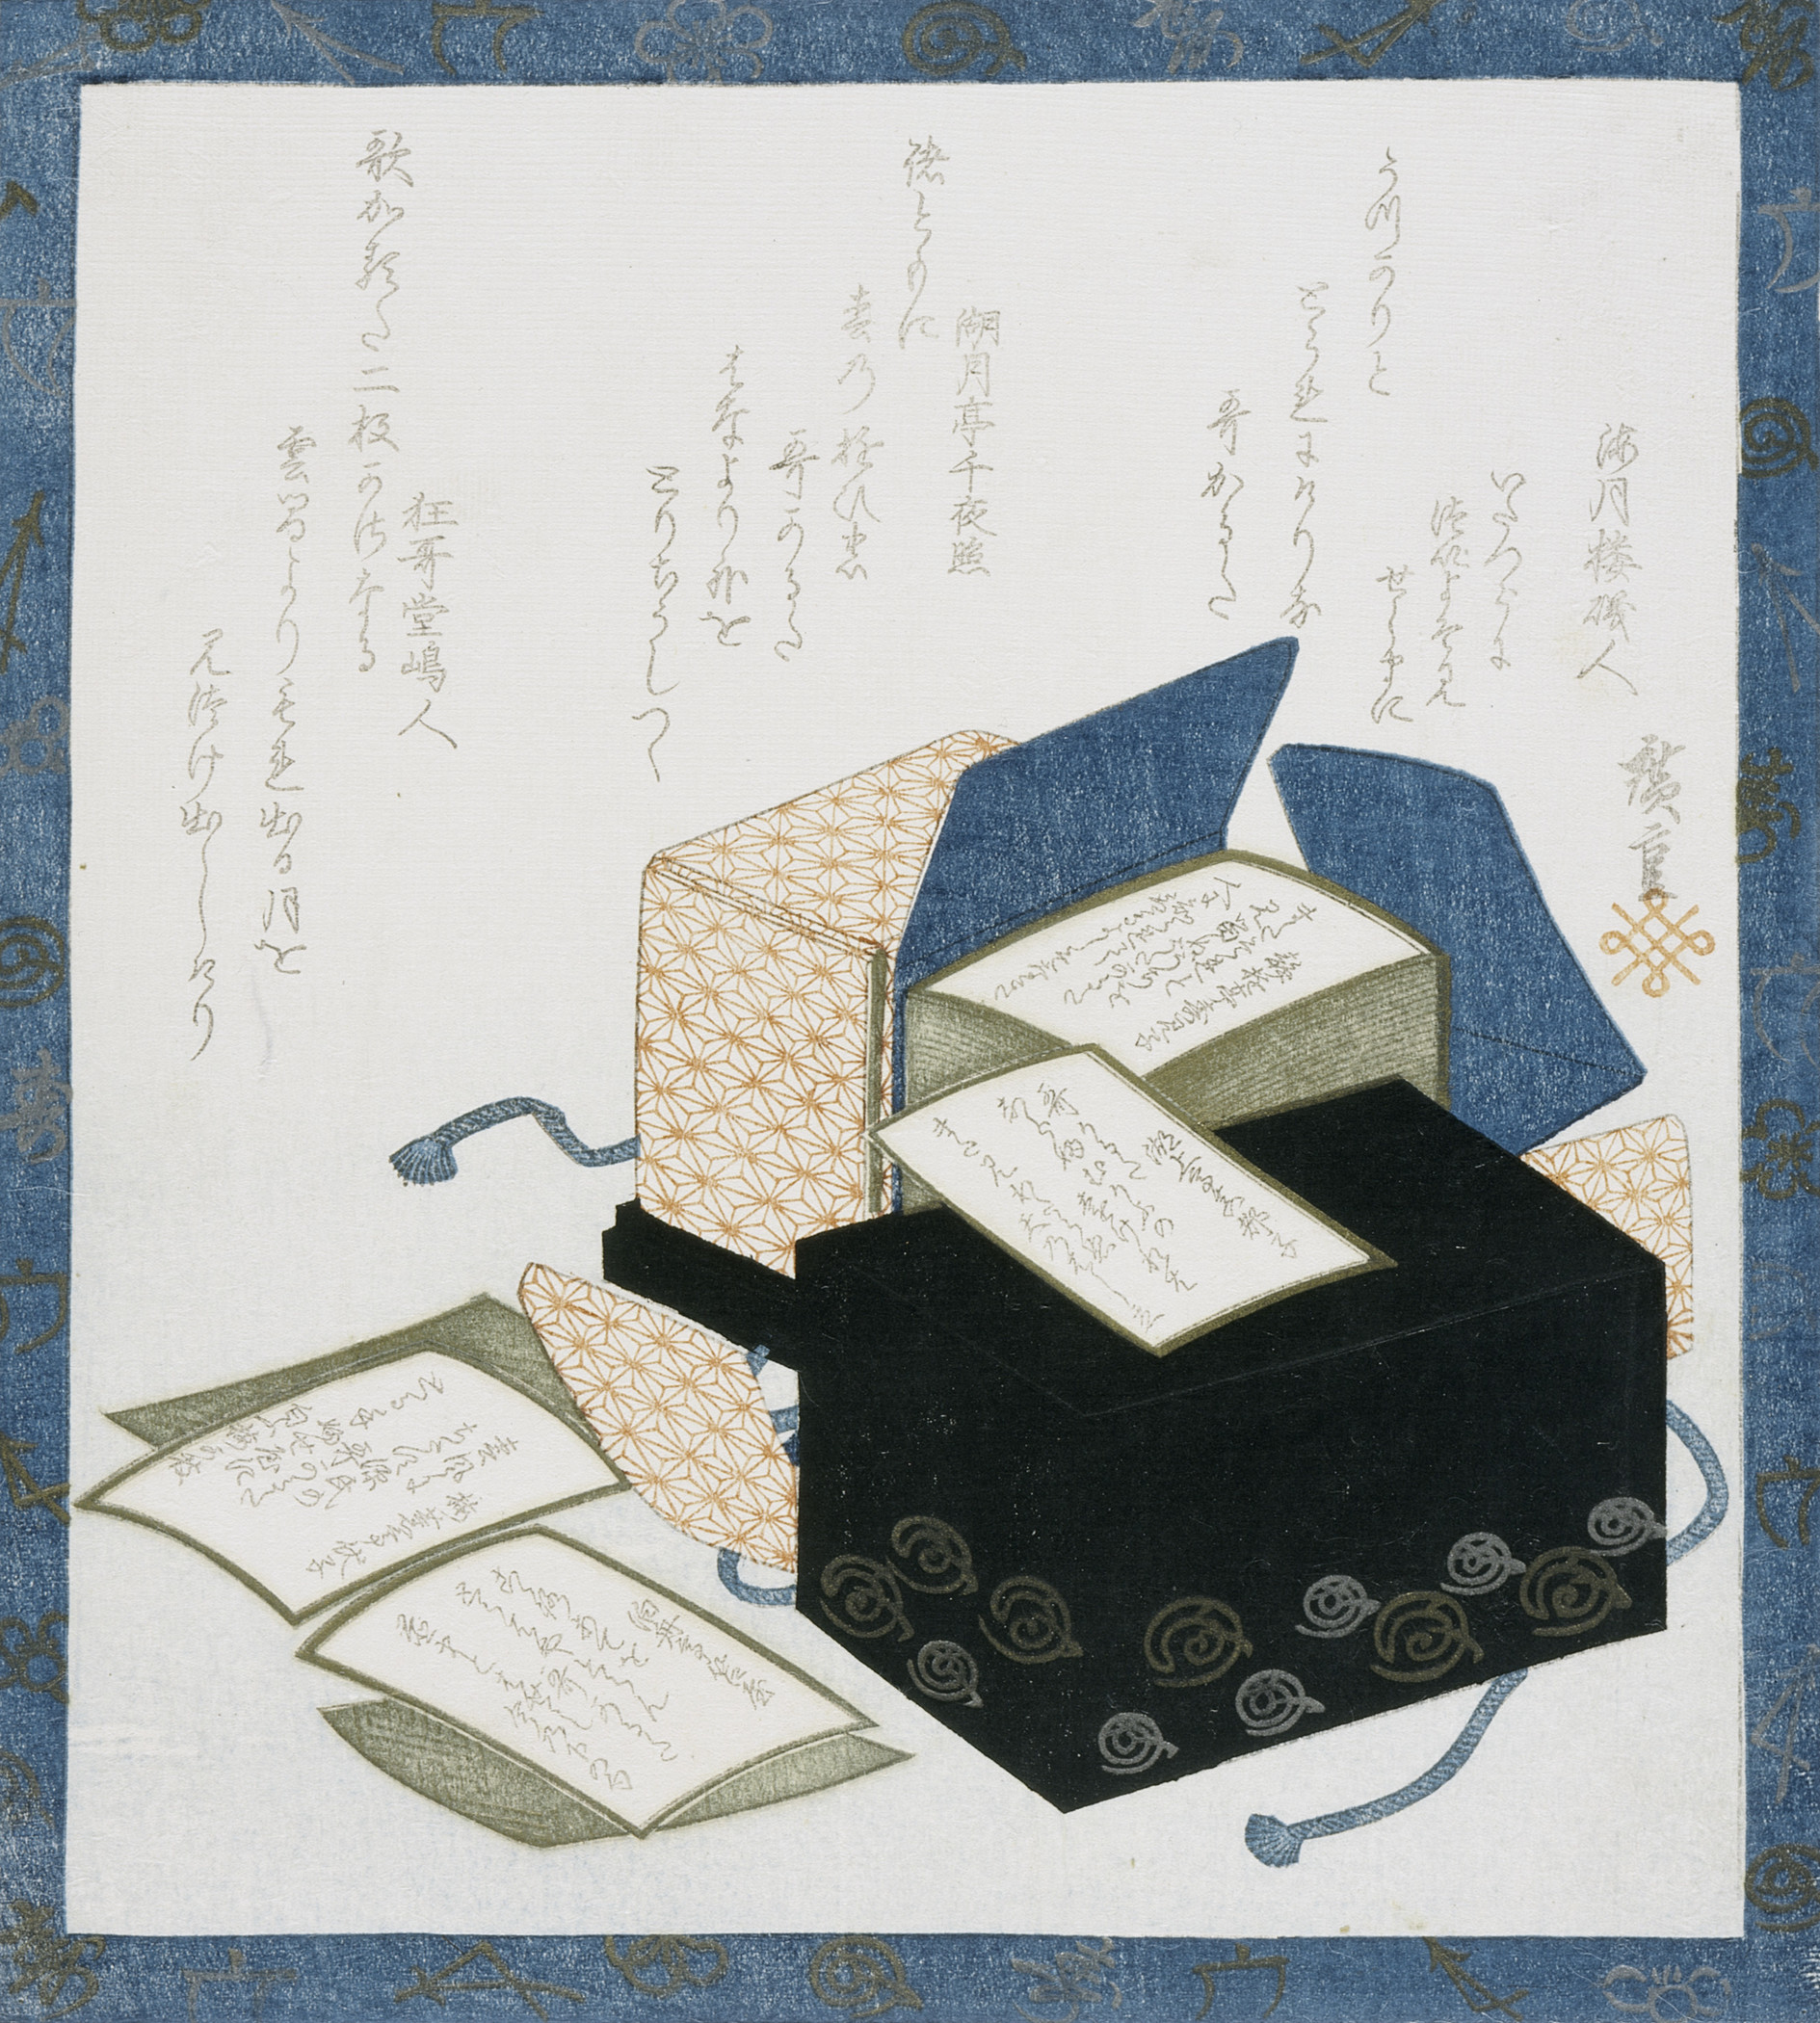 Utagawa Hiroshige, Poetry Cards from the One Hundred Poems by One Hundred Poets, 1833, Los Angeles County Museum of Art, anonymous gift, photo © Museum Associates/LACMA